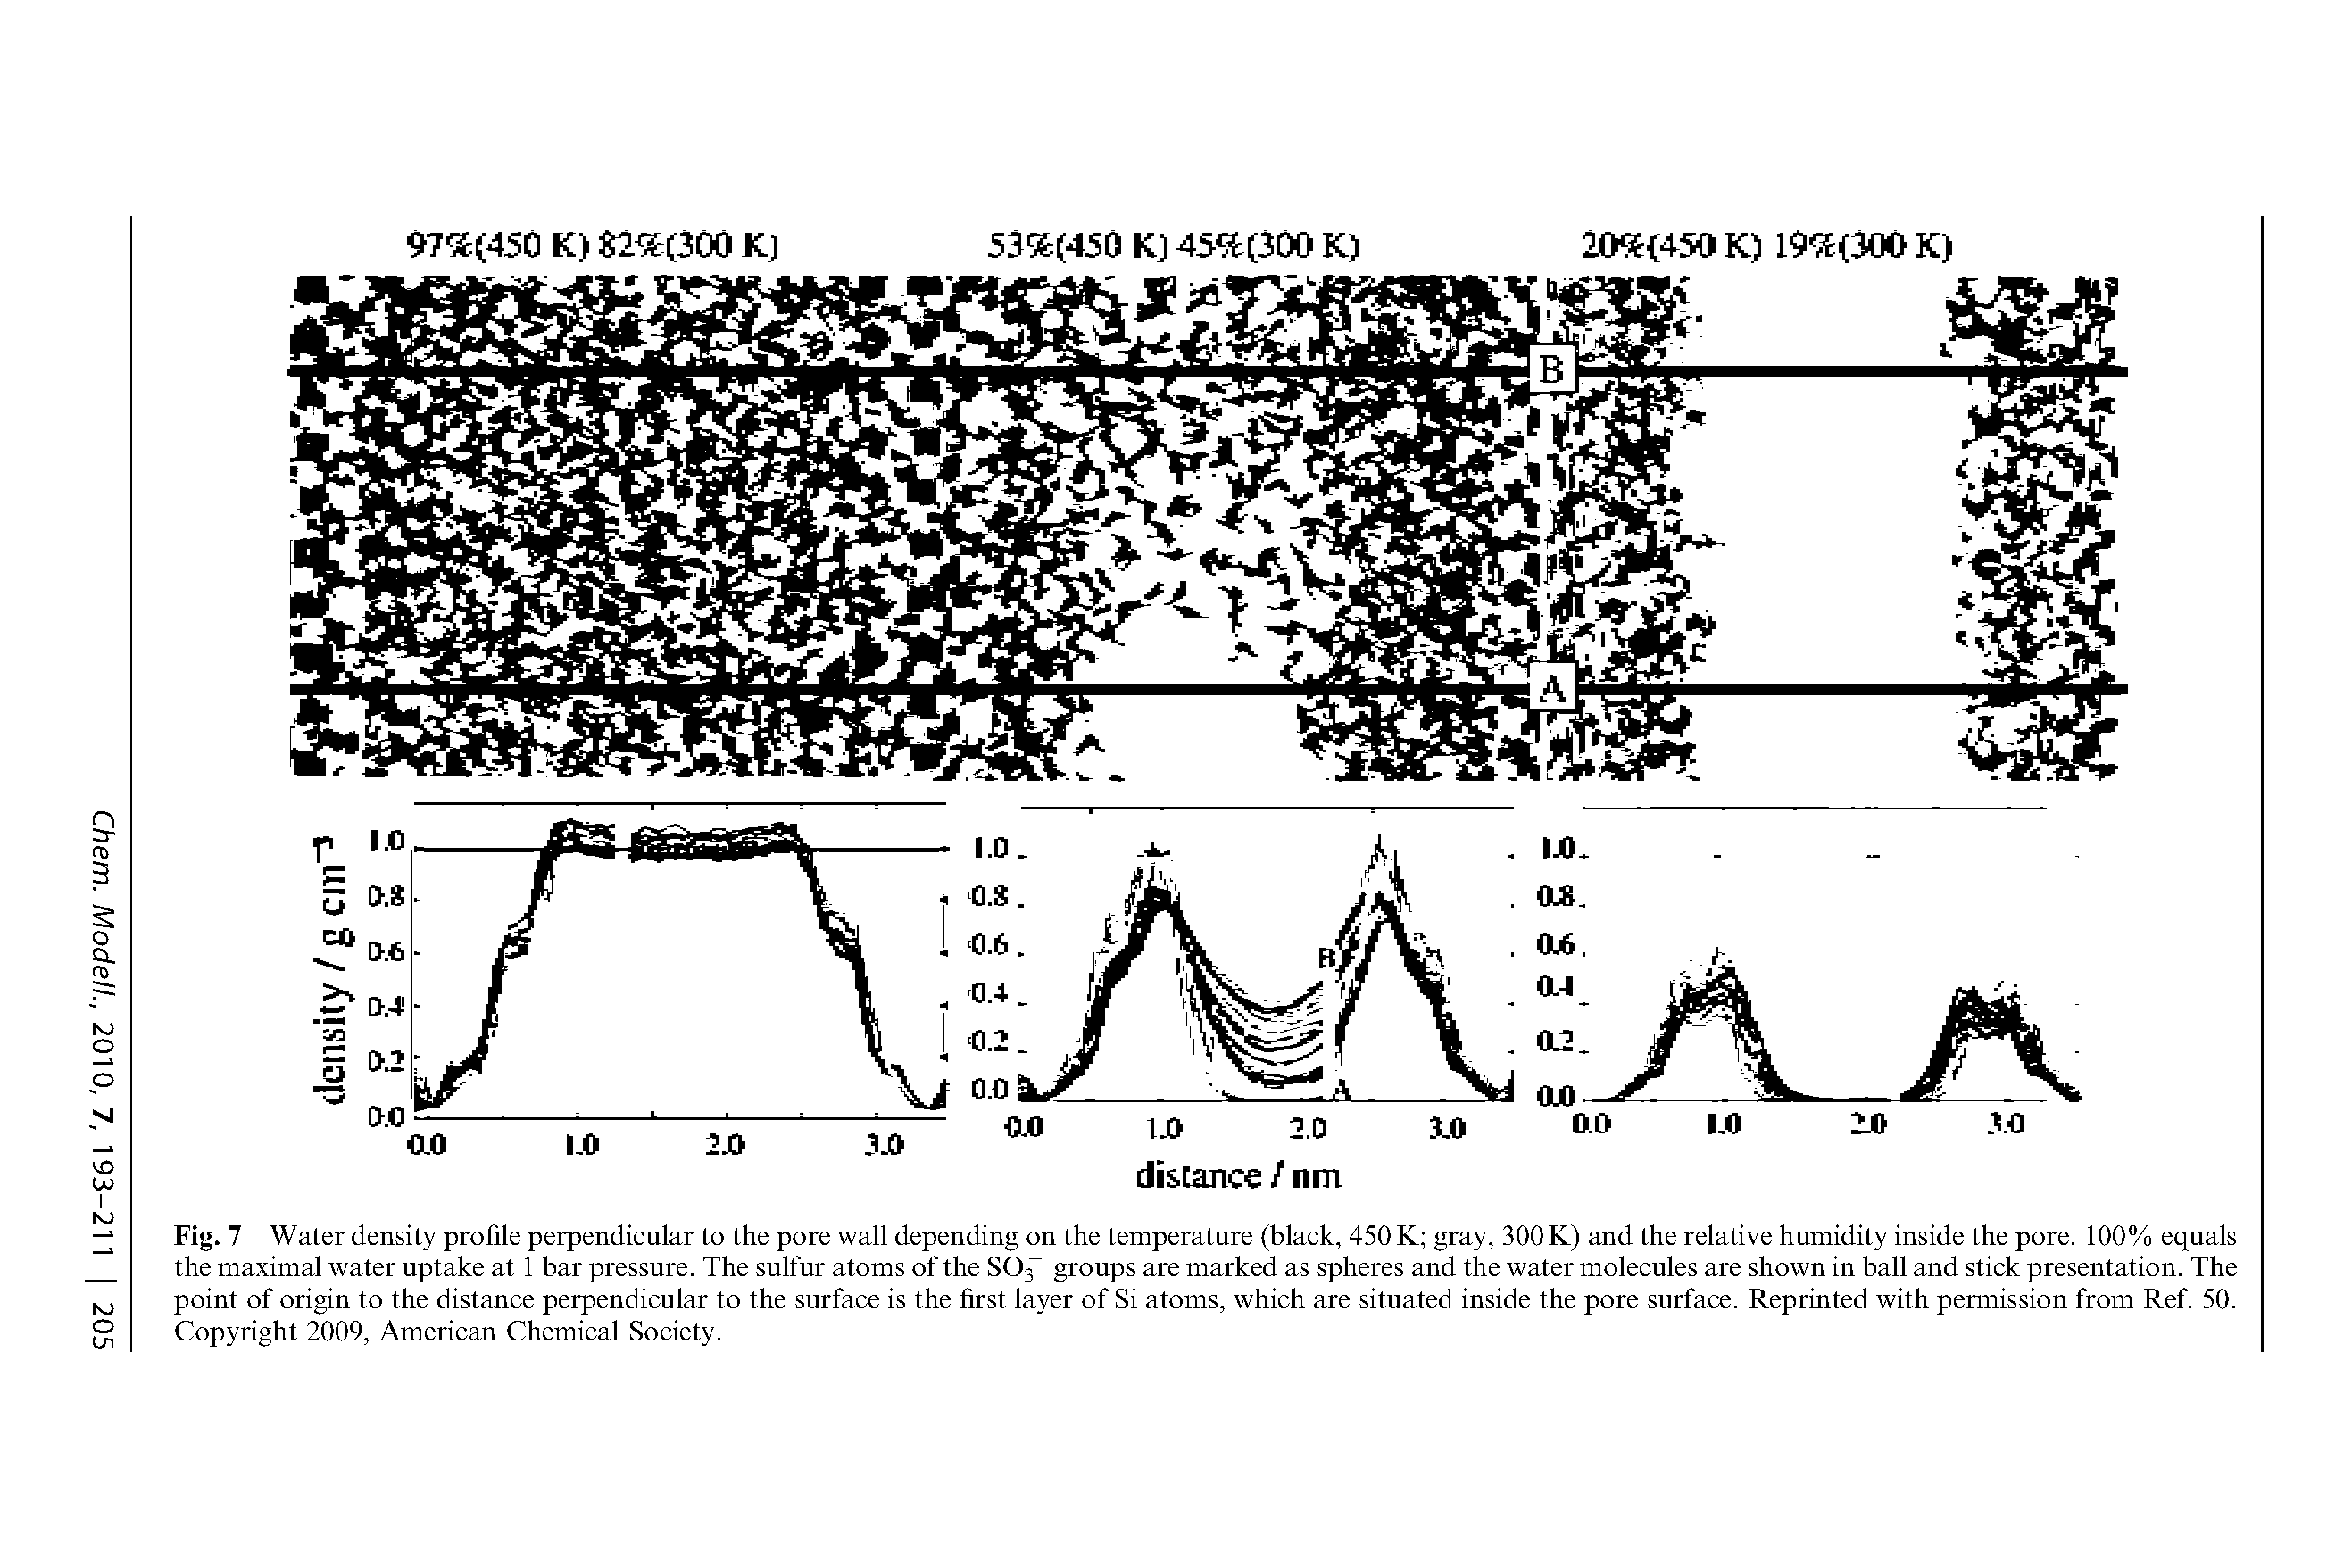 Fig. 7 Water density profile perpendicular to the pore wall depending on the temperature (black, 450 K gray, 300 K) and the relative humidity inside the pore. 100% equals the maximal water uptake at 1 bar pressure. The sulfur atoms of the S03 groups are marked as spheres and the water molecules are shown in ball and stick presentation. The point of origin to the distance perpendicular to the surface is the first layer of Si atoms, which are situated inside the pore surface. Reprinted with permission from Ref. 50. Copyright 2009, American Chemical Society.